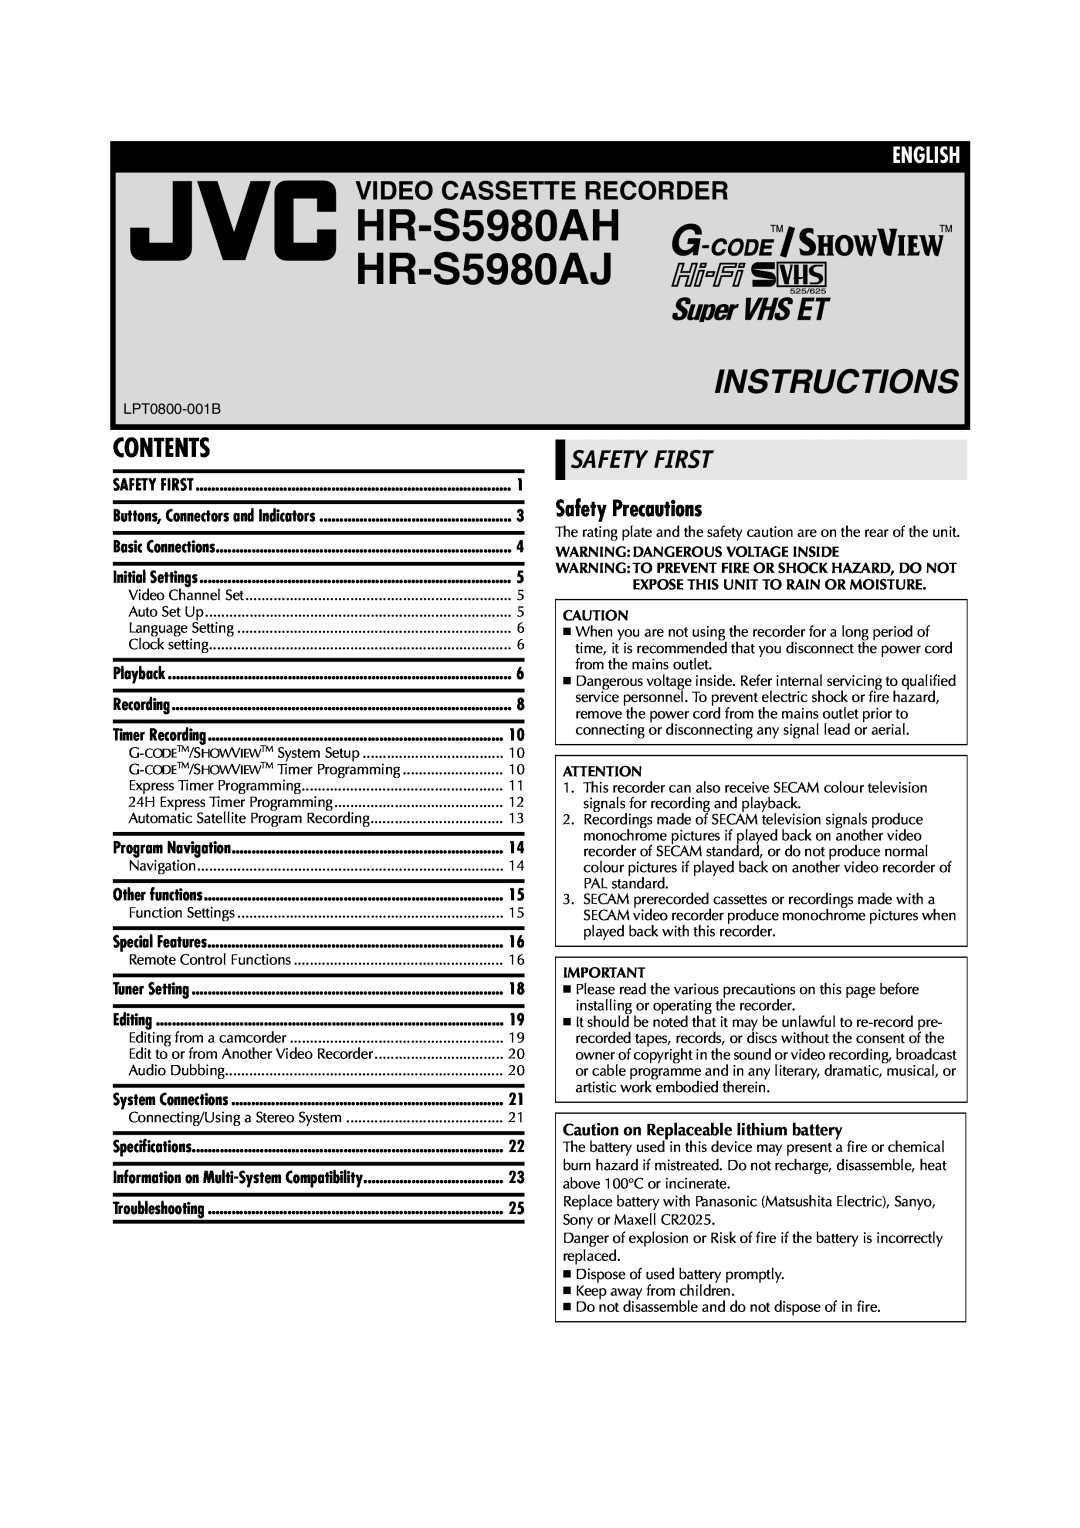 JVC HR-S5980AJ specifications Contents, Safety First, Safety Precautions, Caution on Replaceable lithium battery, English 